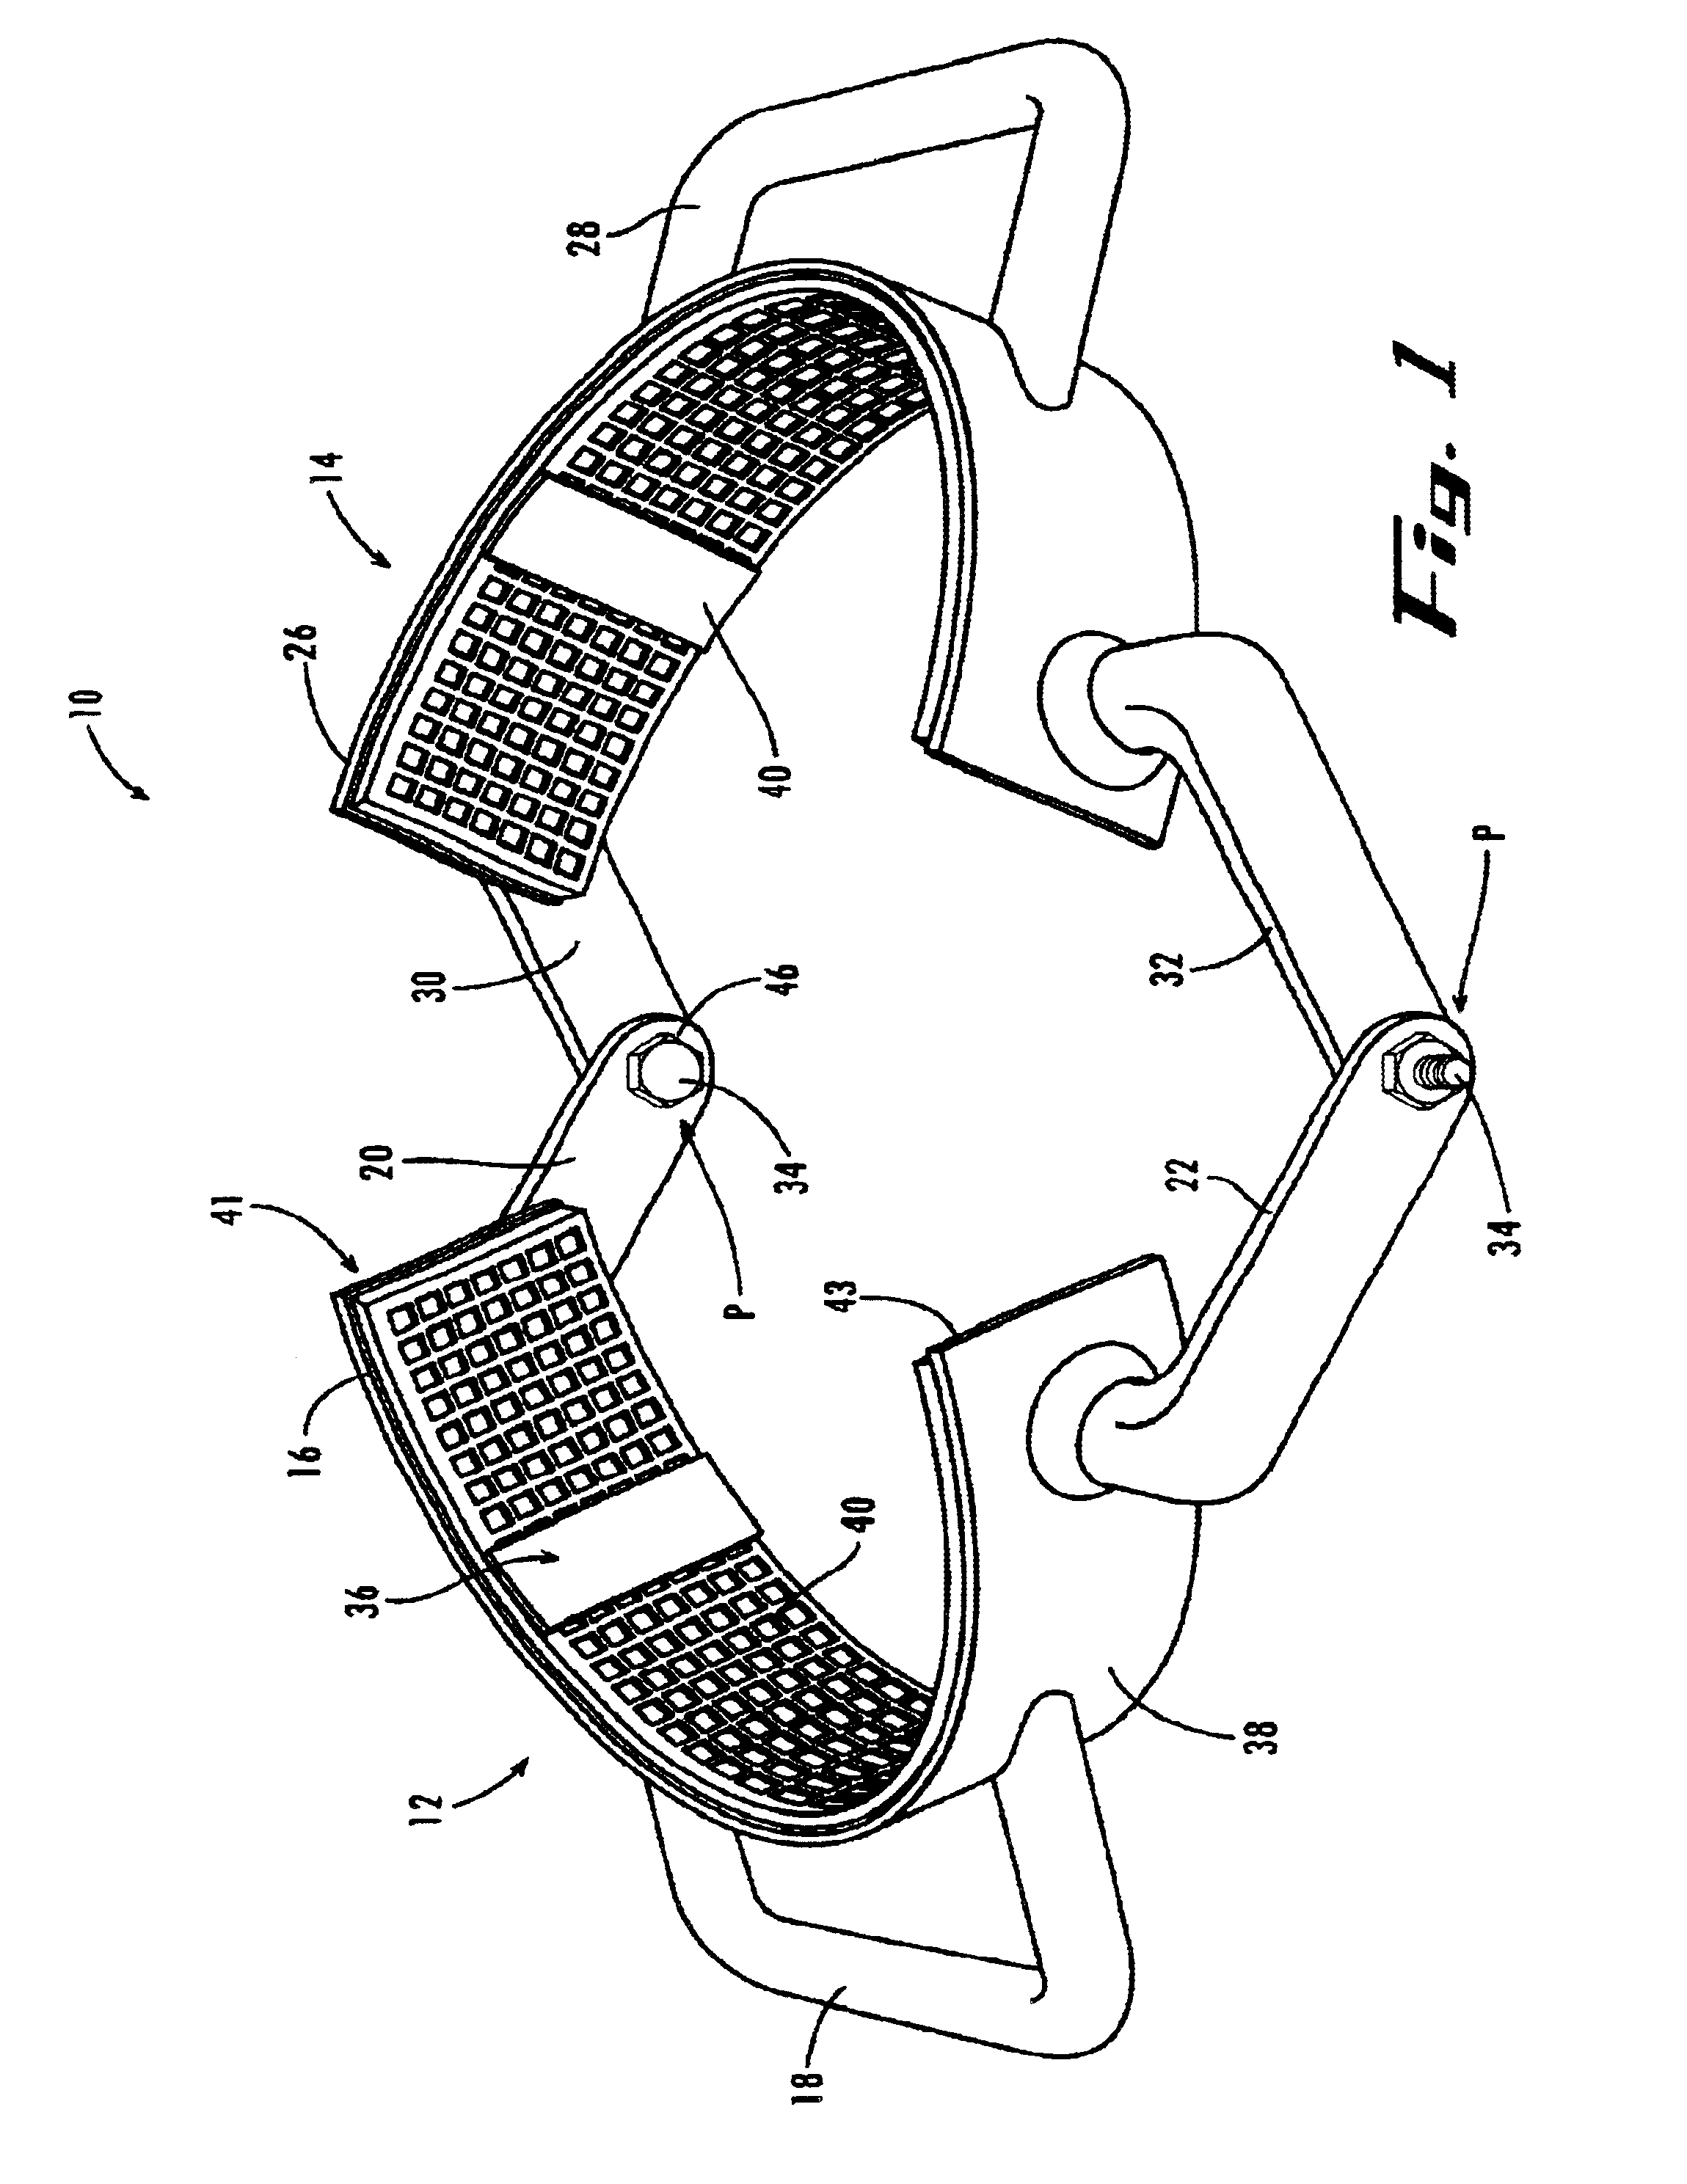 Device for lifting gas cylinders